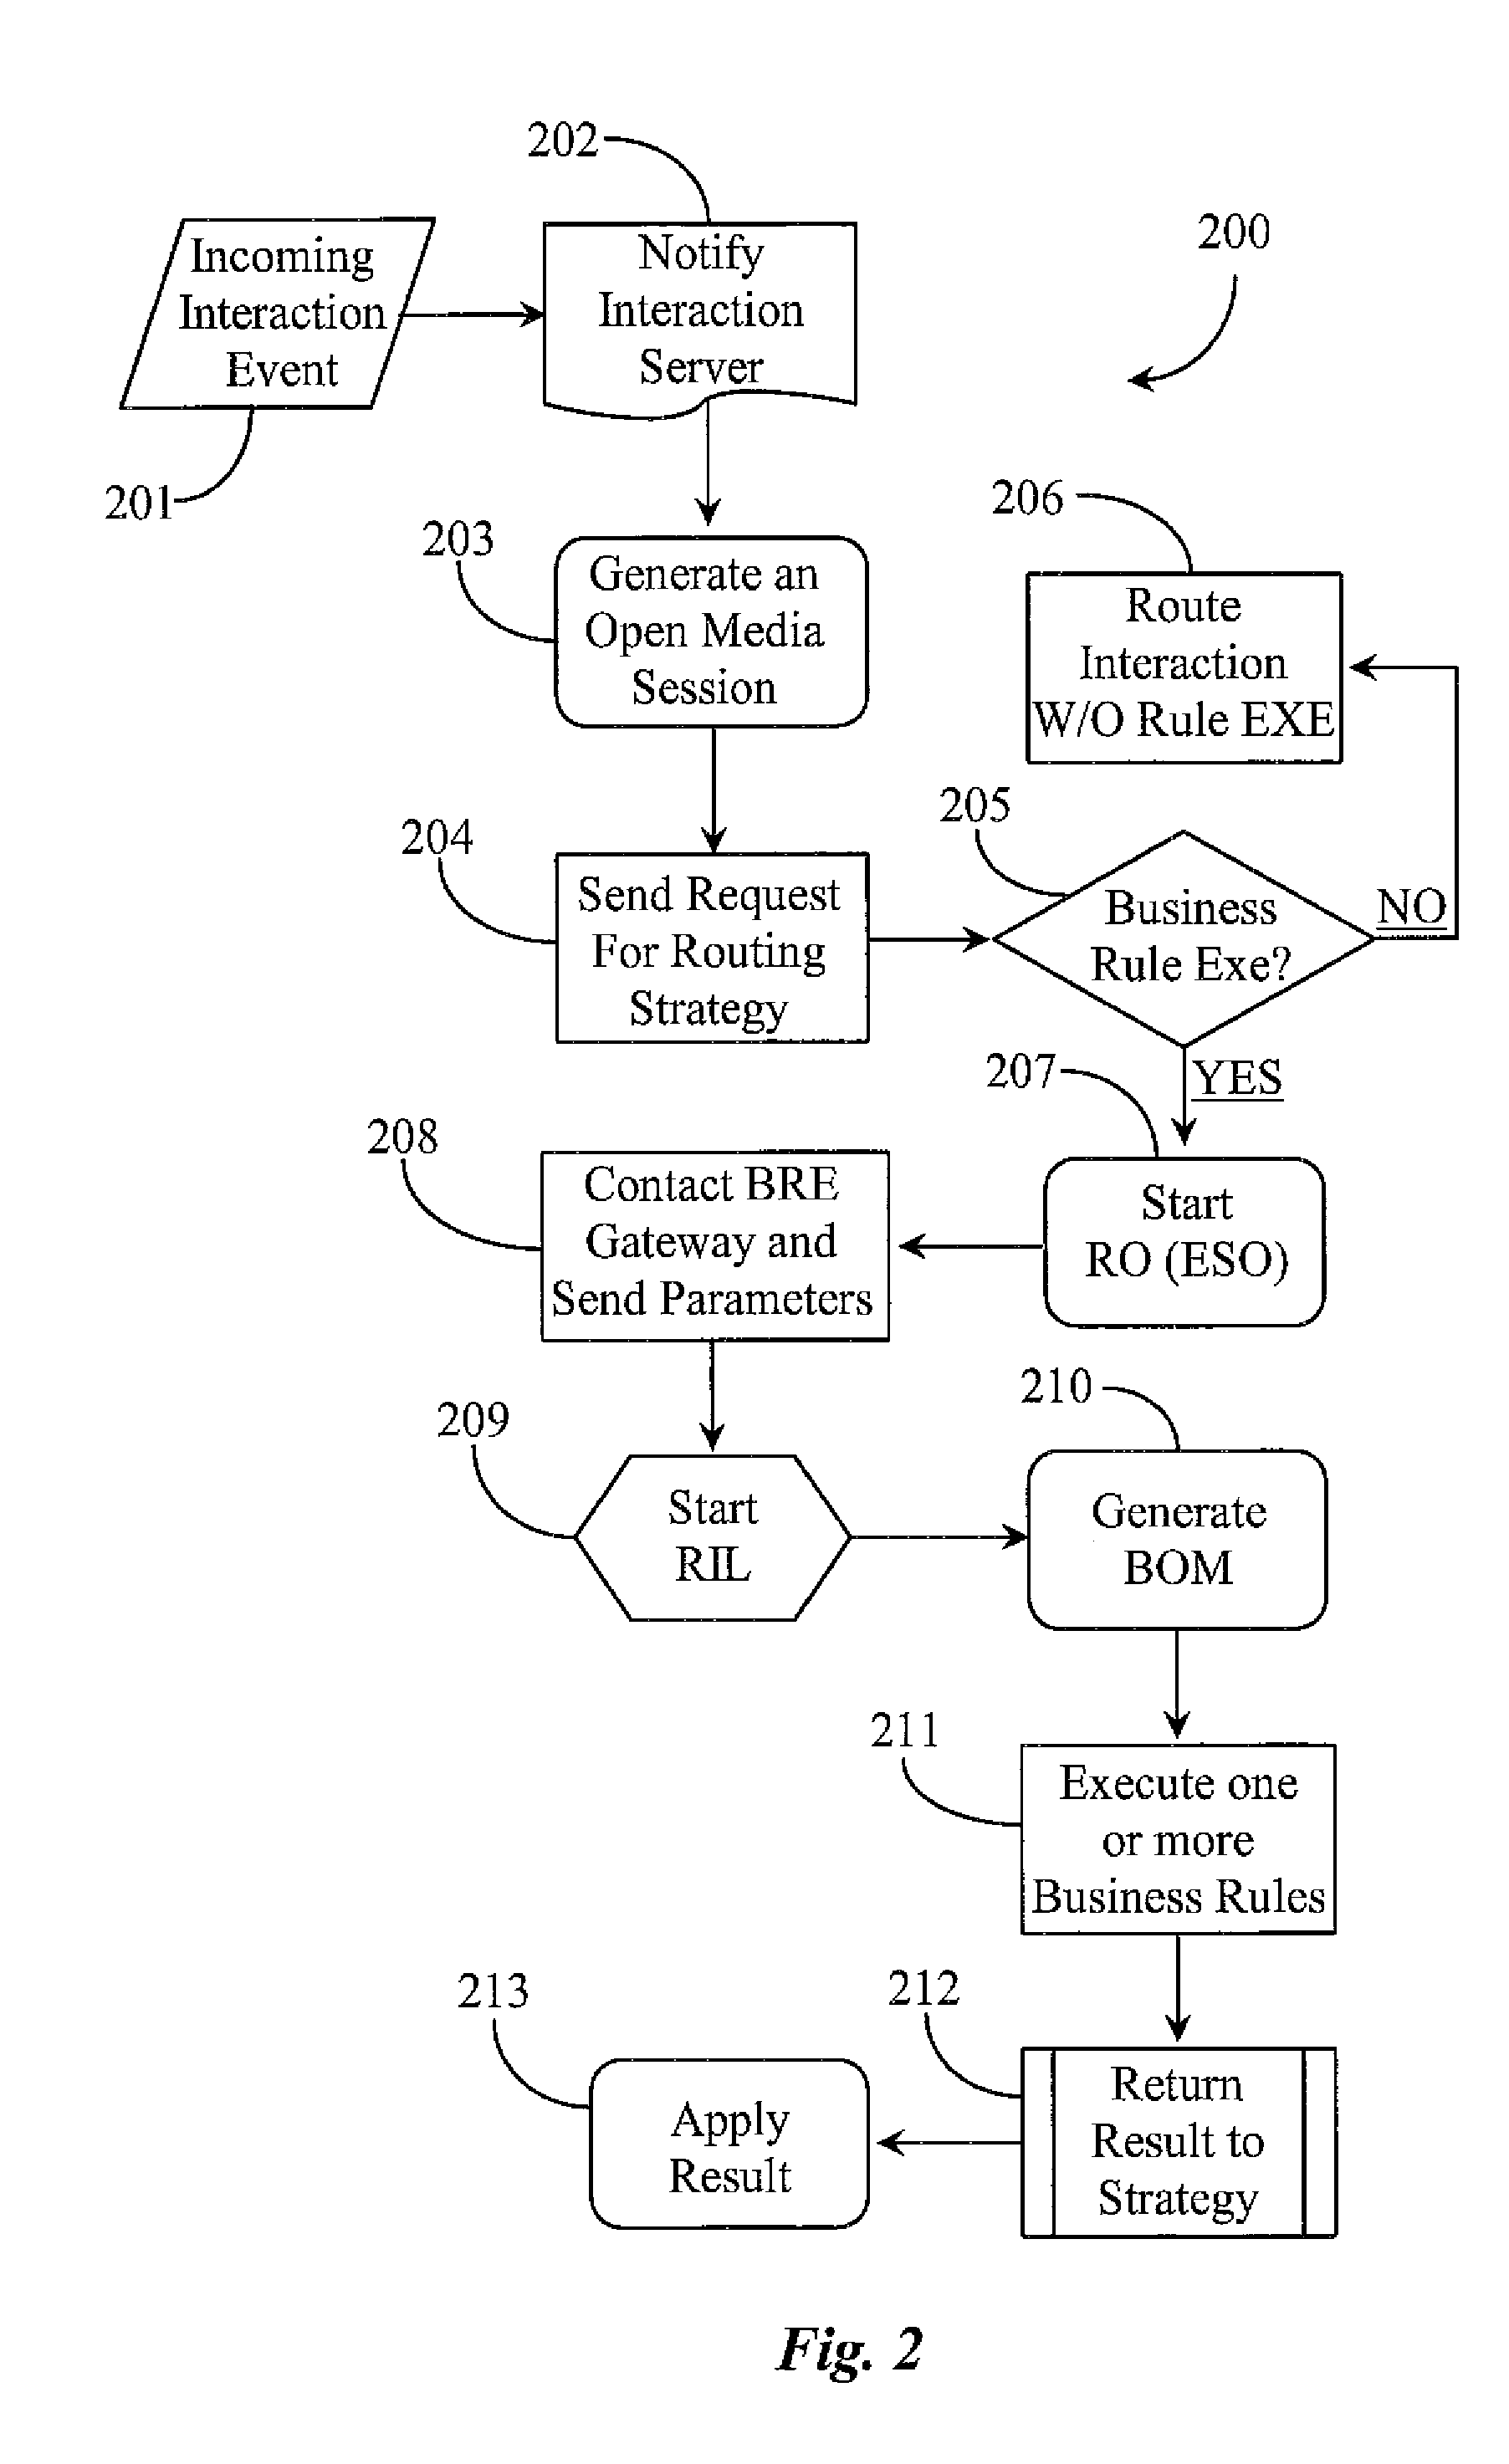 Method and system for integrating an interaction management system with a business rules management system